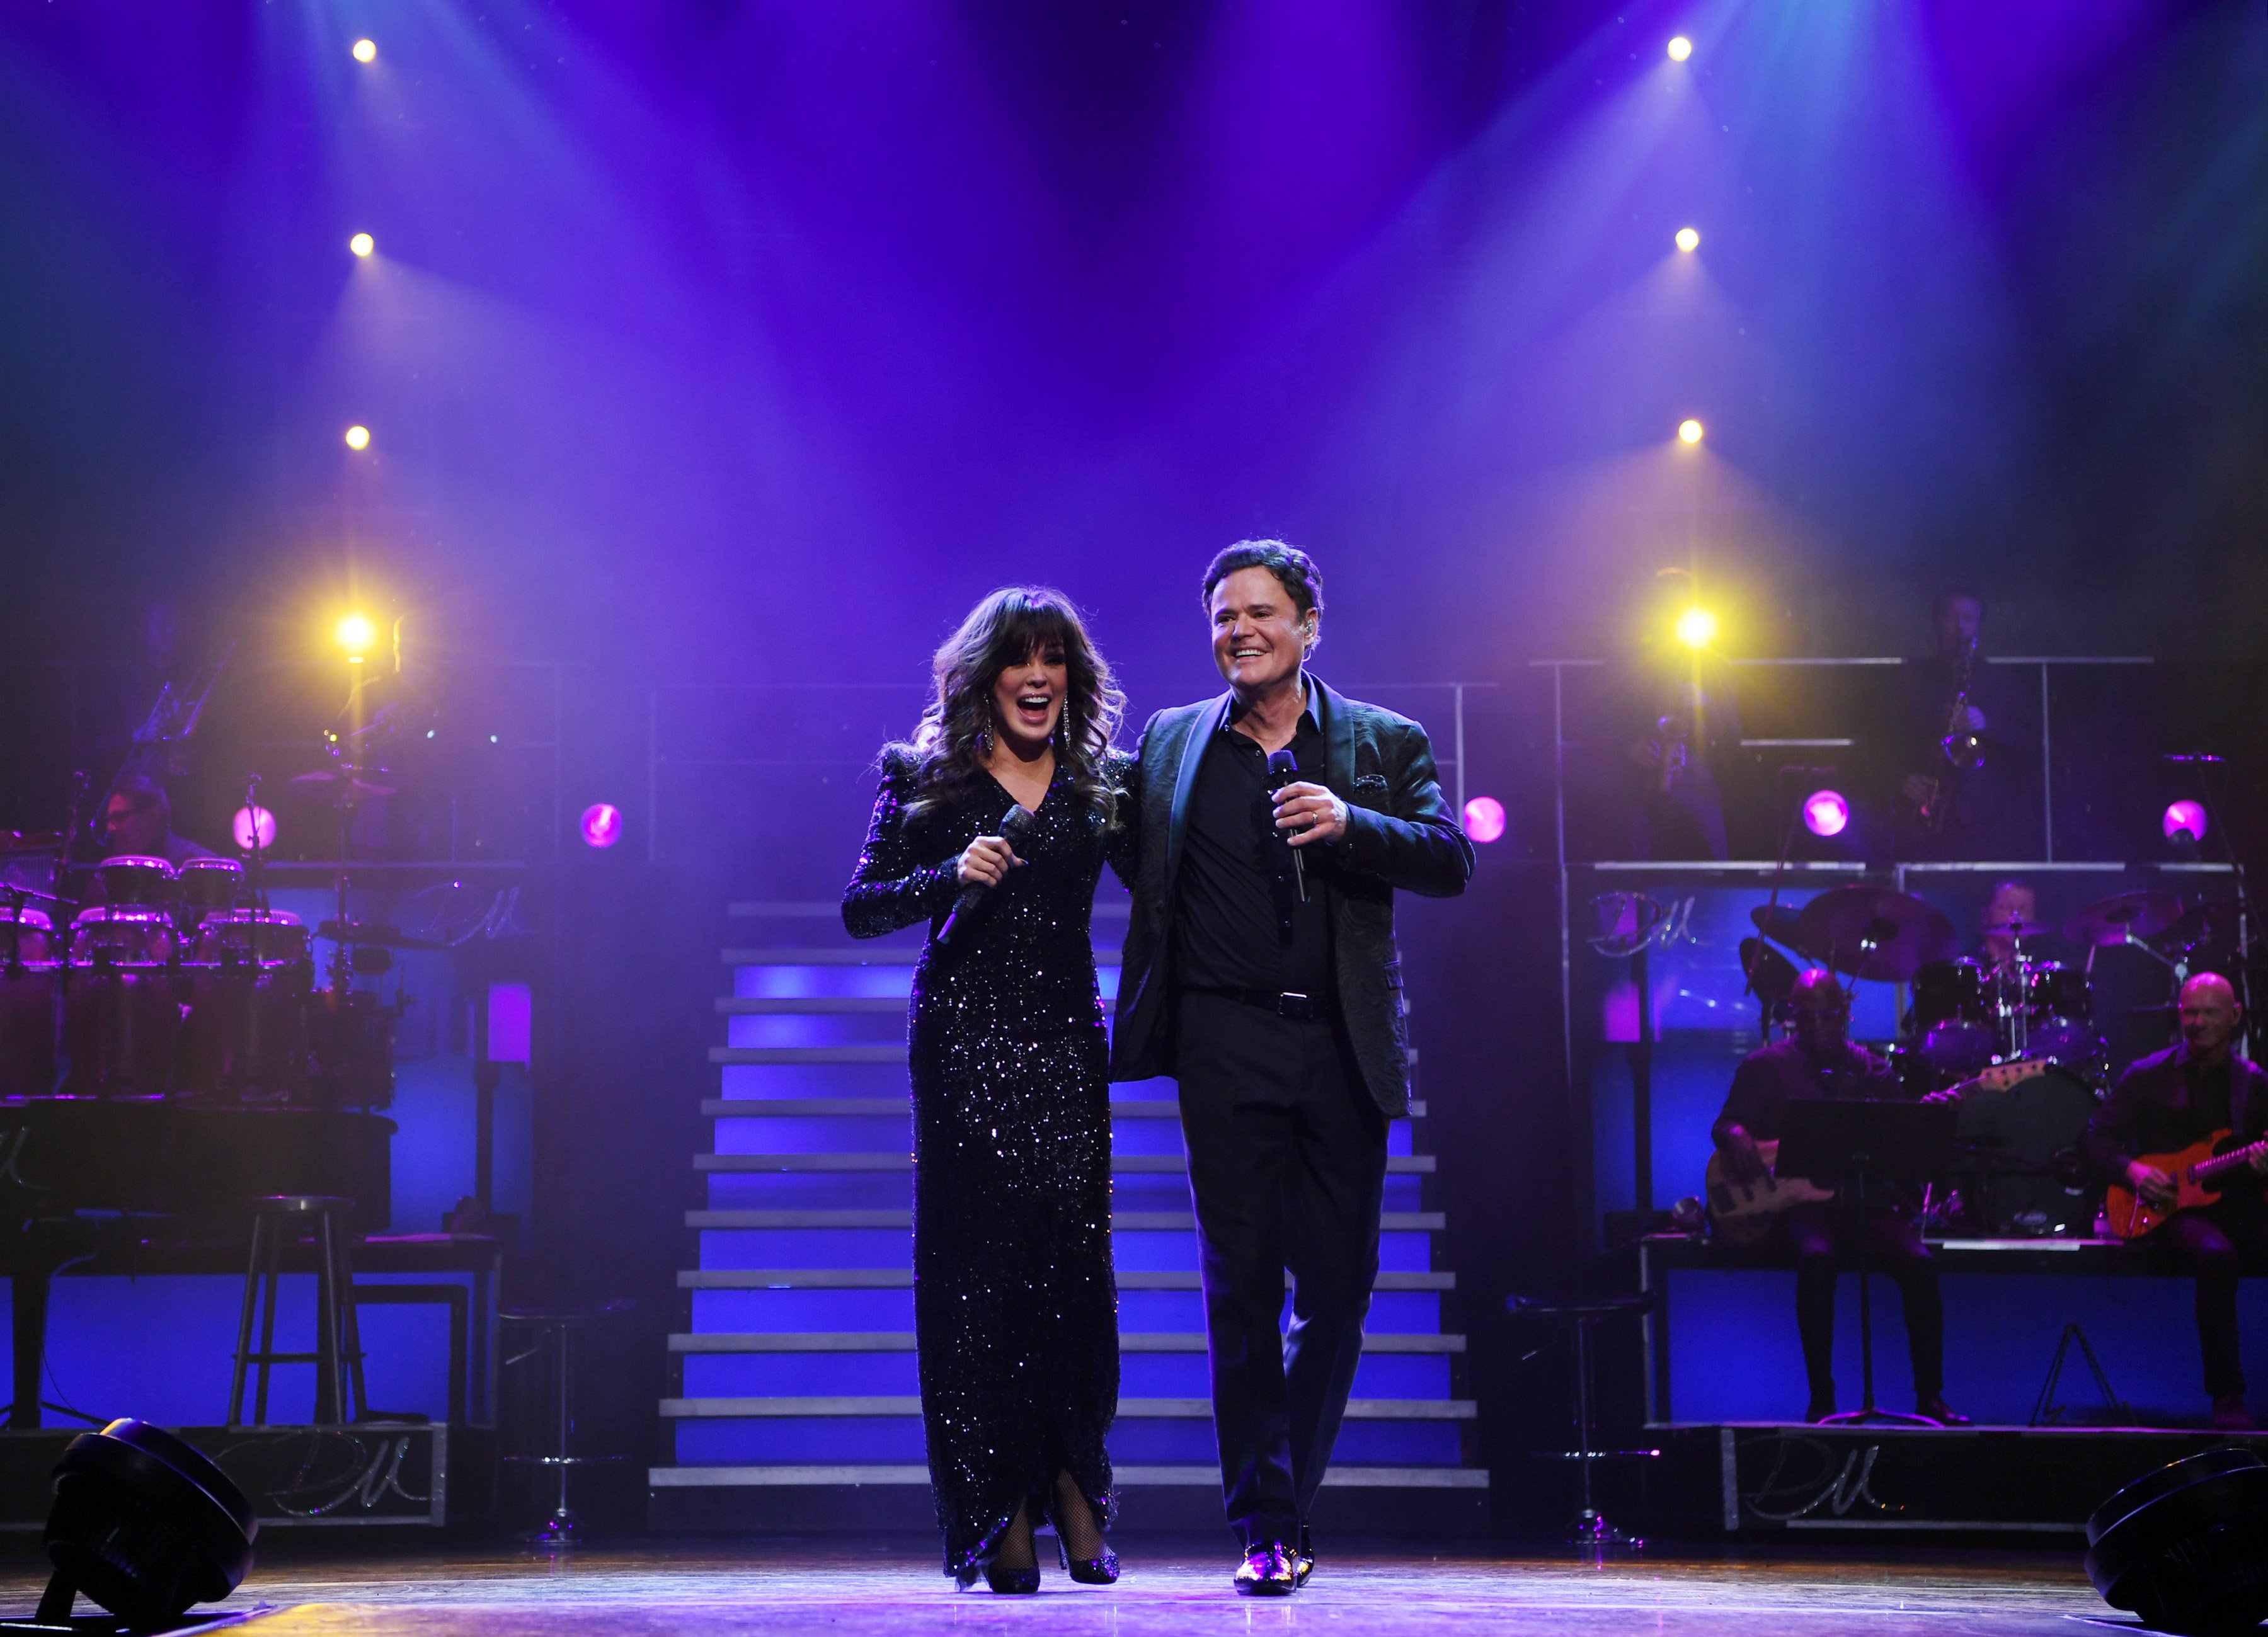 Donny Osmond & Marie Osmond during their final performance at Flamingo Las Vegas on November 16, 2019 in Las Vegas, Nevada | Source: Getty Images